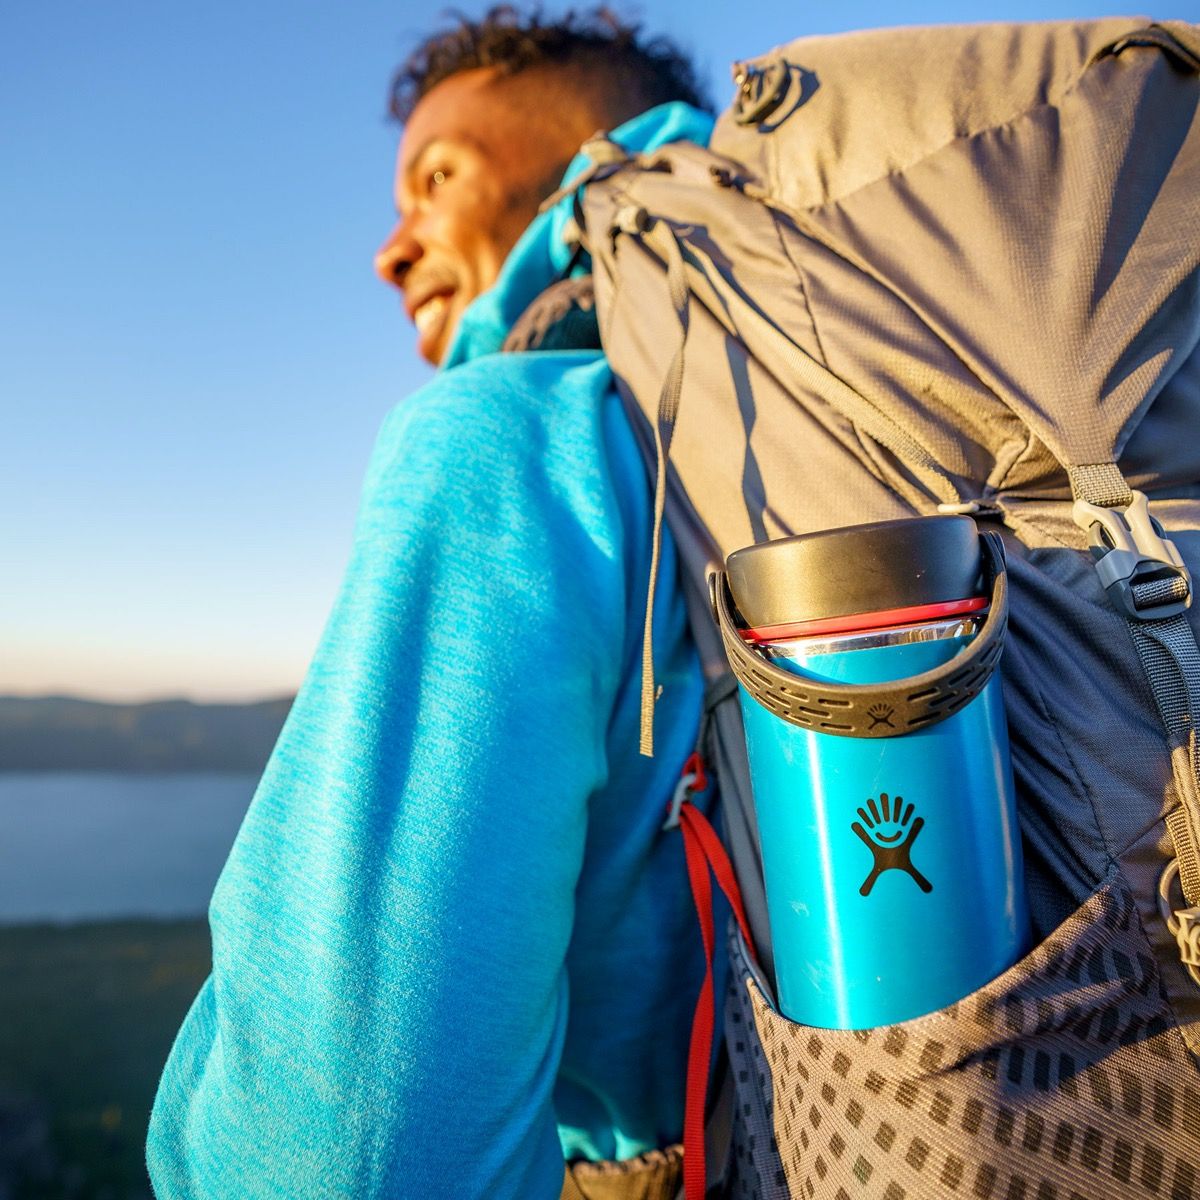 Hydro Flask 24 oz Light Weight Wide Mouth Trail Series by kebunpisank